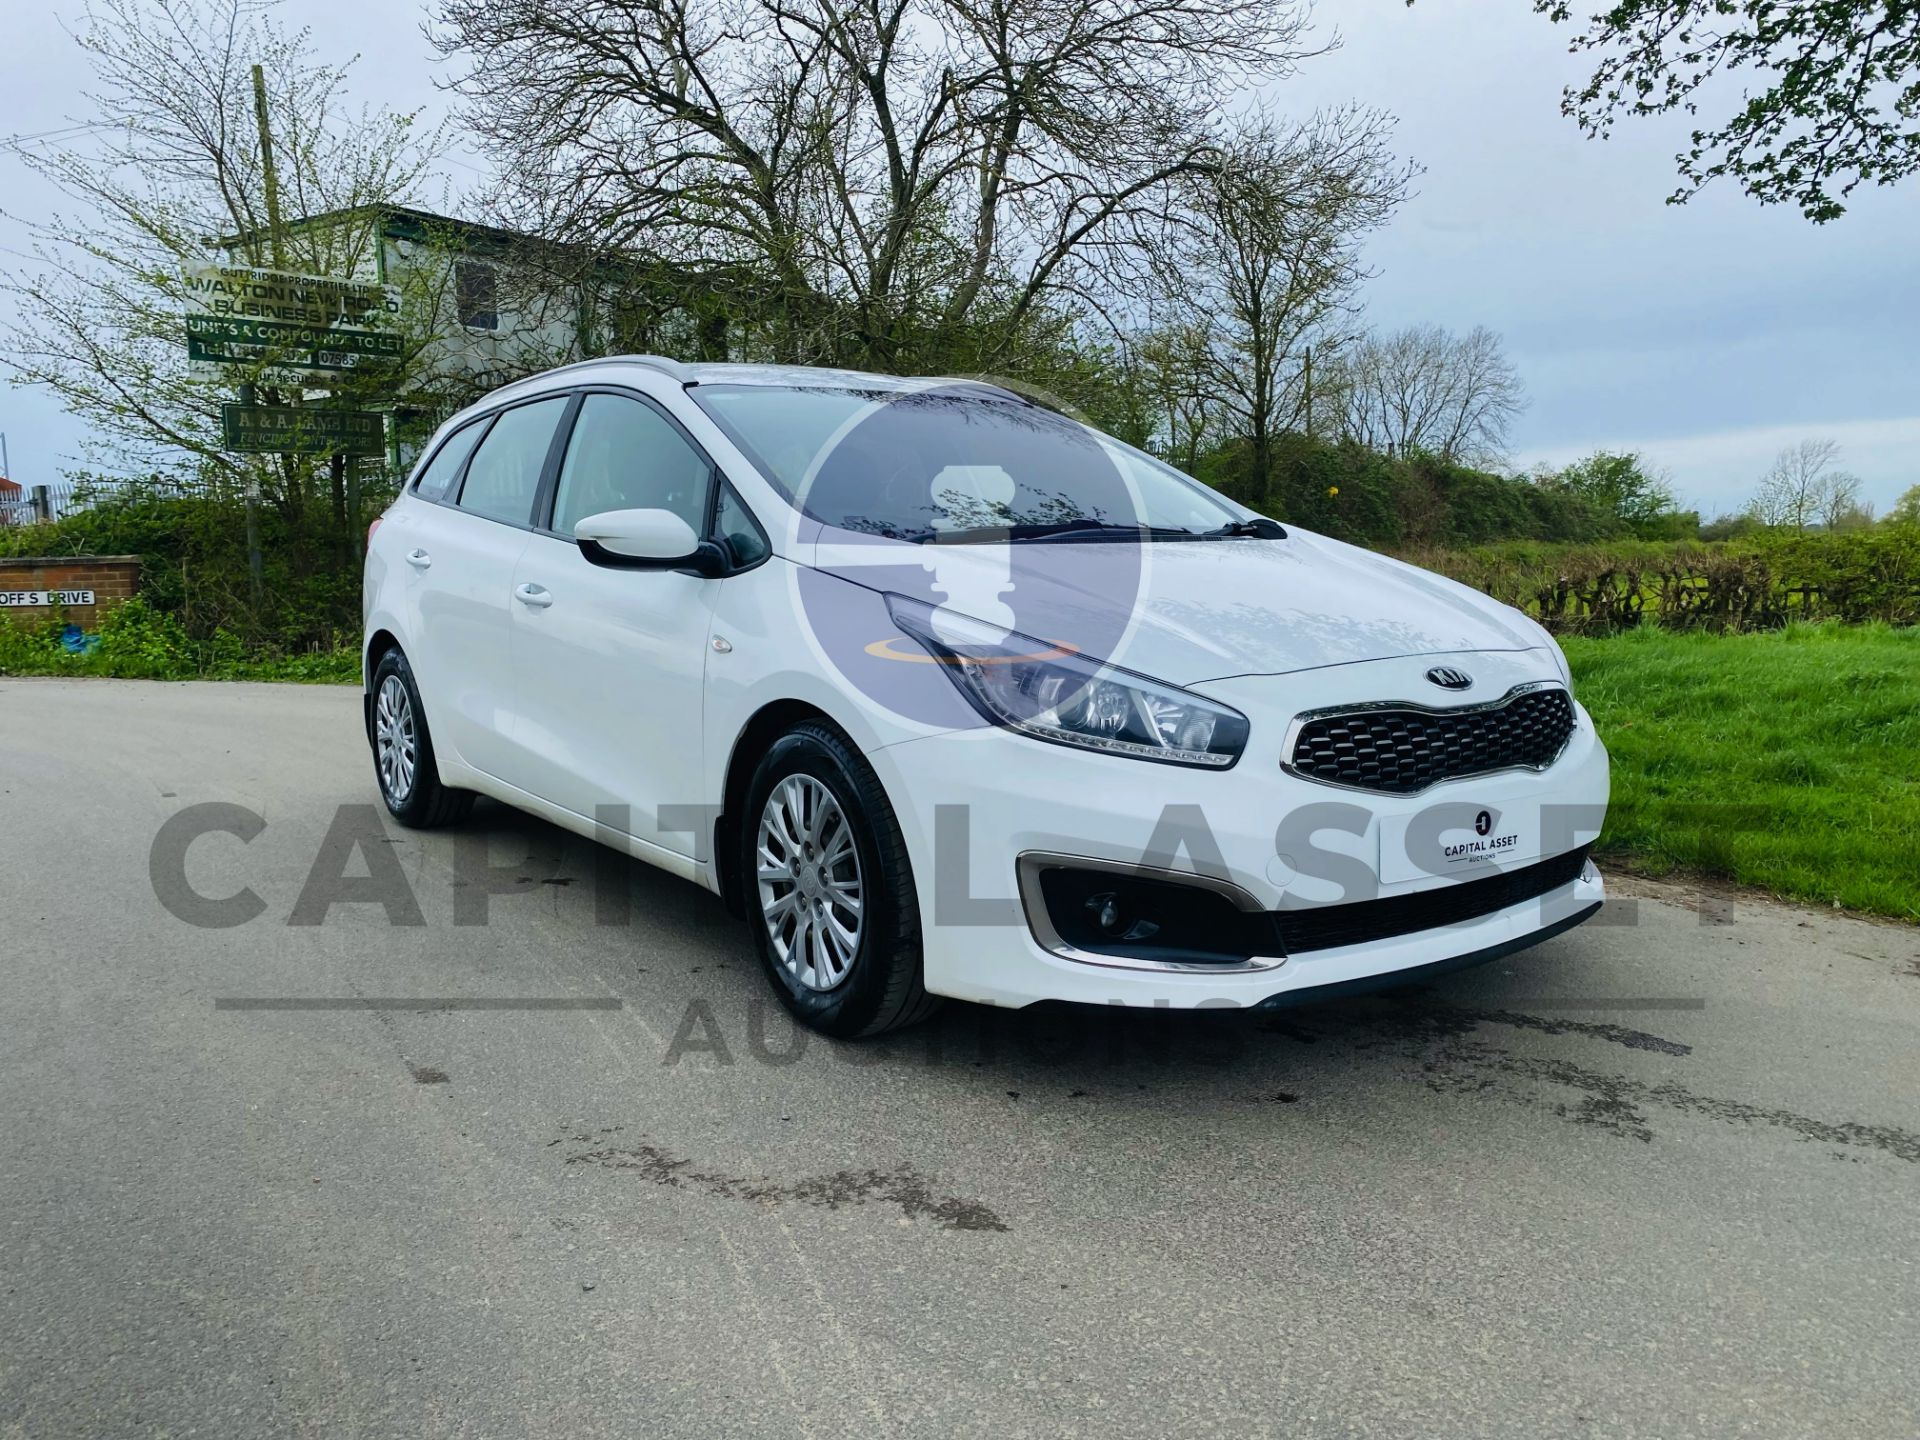 (ON SALE) KIA CEED 1.6 CRDI ISG 1 ESTATE- 18 REG - FULL SERVICE HISTORY - AIR CONDITIONING - Image 2 of 27